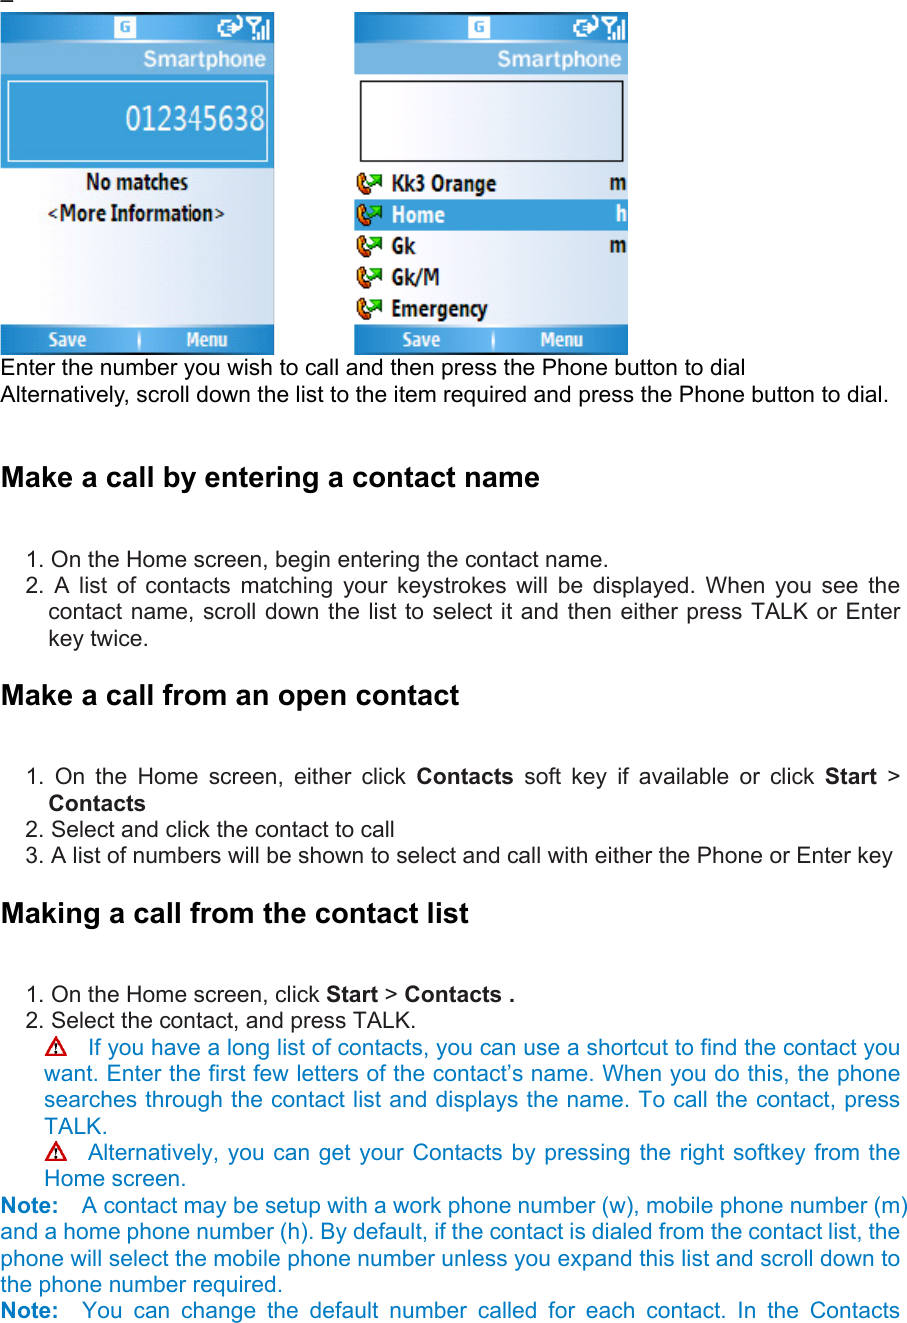 –           Enter the number you wish to call and then press the Phone button to dial   Alternatively, scroll down the list to the item required and press the Phone button to dial.  Make a call by entering a contact name   1. On the Home screen, begin entering the contact name.   2. A list of contacts matching your keystrokes will be displayed. When you see the contact name, scroll down the list to select it and then either press TALK or Enter key twice. Make a call from an open contact   1. On the Home screen, either click Contacts soft key if available or click Start &gt; Contacts 2. Select and click the contact to call   3. A list of numbers will be shown to select and call with either the Phone or Enter key Making a call from the contact list   1. On the Home screen, click Start &gt; Contacts .   2. Select the contact, and press TALK.     If you have a long list of contacts, you can use a shortcut to find the contact you want. Enter the first few letters of the contact’s name. When you do this, the phone searches through the contact list and displays the name. To call the contact, press TALK.   Alternatively, you can get your Contacts by pressing the right softkey from the Home screen. Note:    A contact may be setup with a work phone number (w), mobile phone number (m) and a home phone number (h). By default, if the contact is dialed from the contact list, the phone will select the mobile phone number unless you expand this list and scroll down to the phone number required. Note:  You can change the default number called for each contact. In the Contacts 